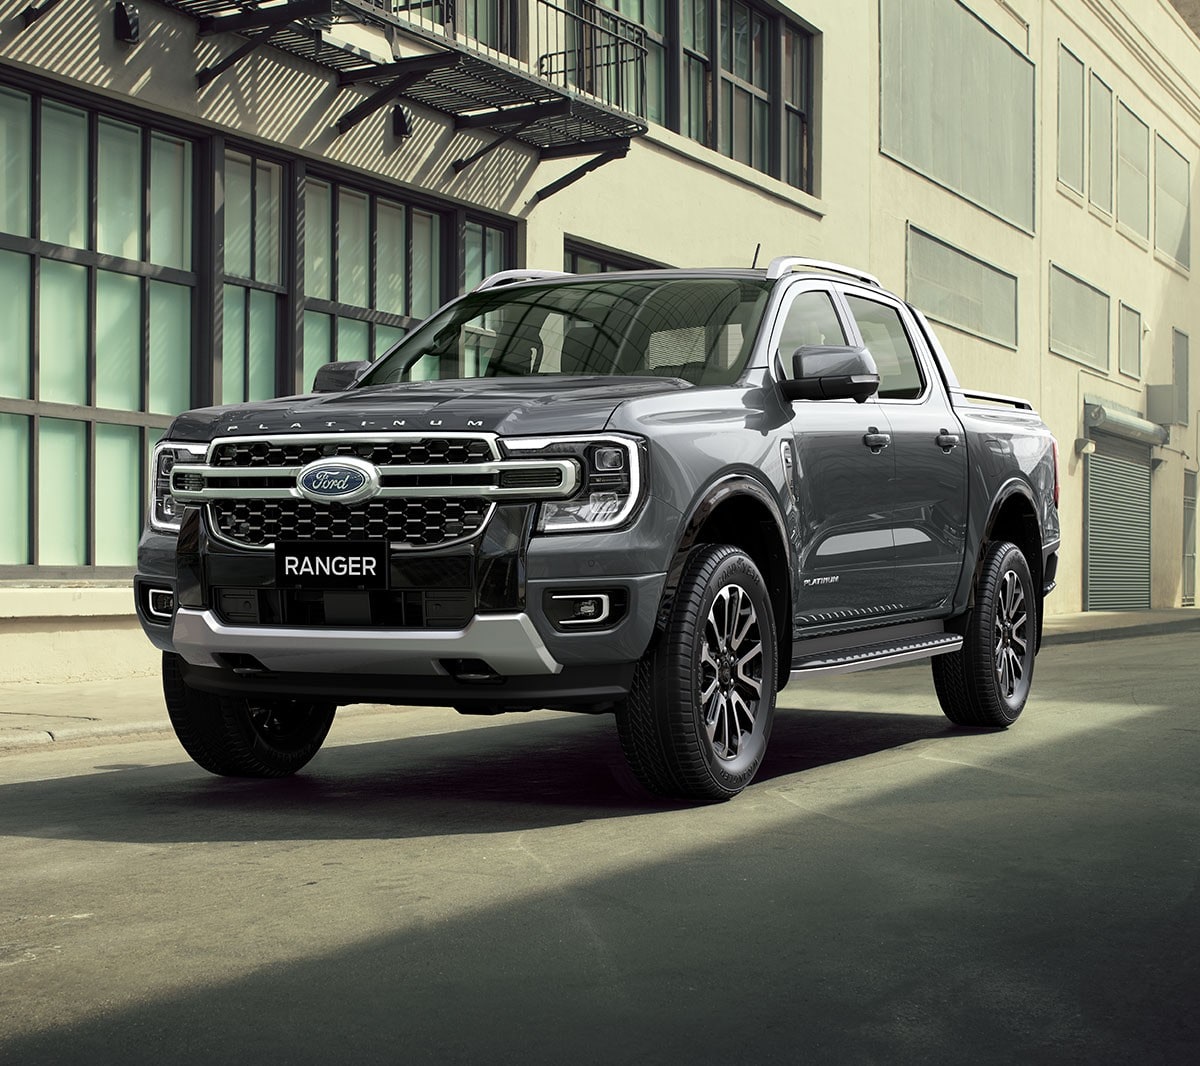 All-New Ford Ranger Platinum front 3/4 view